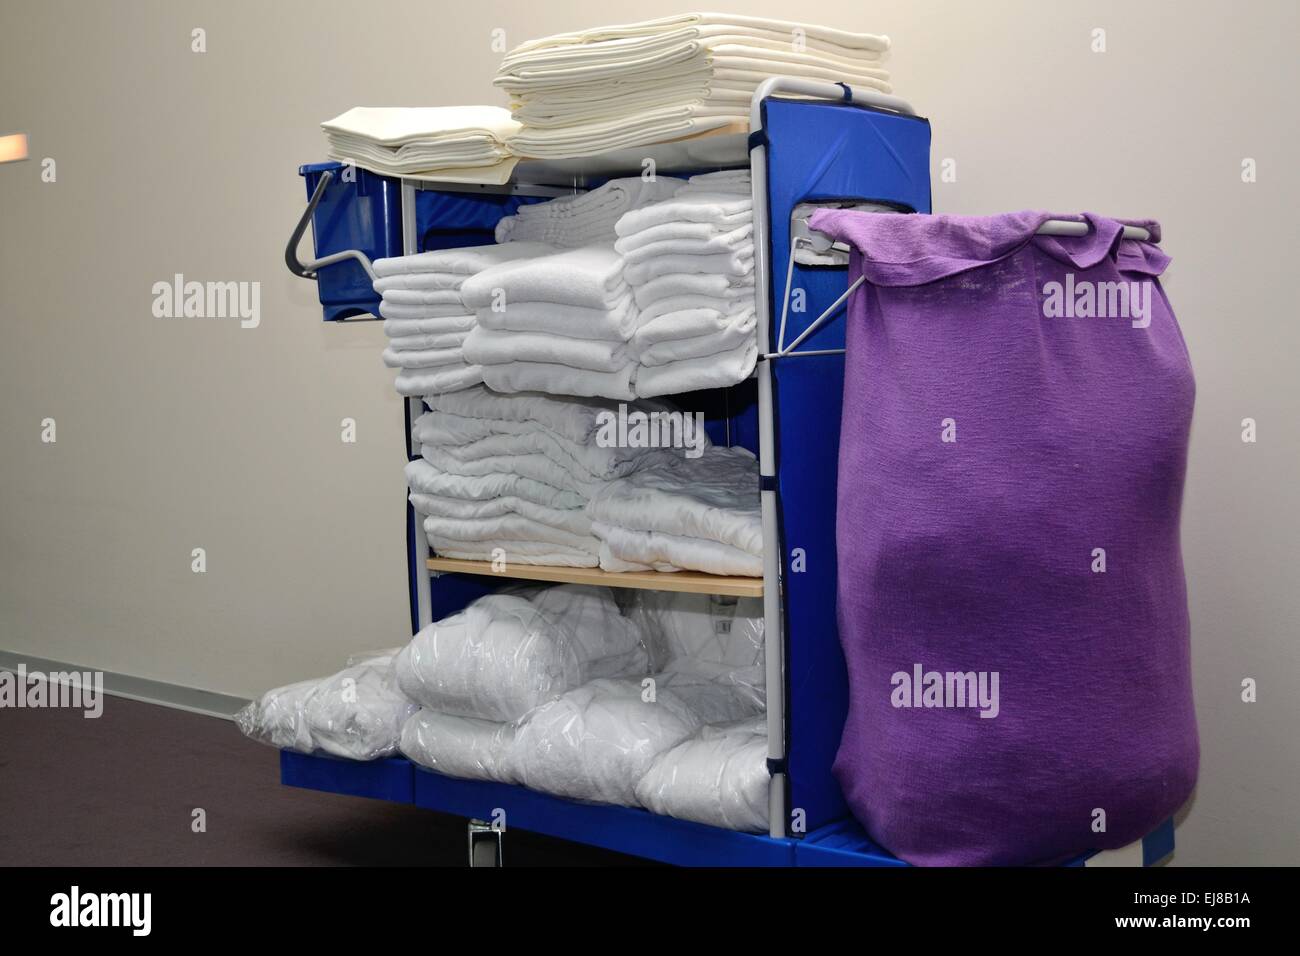 fresh linen for hotel rooms Stock Photo